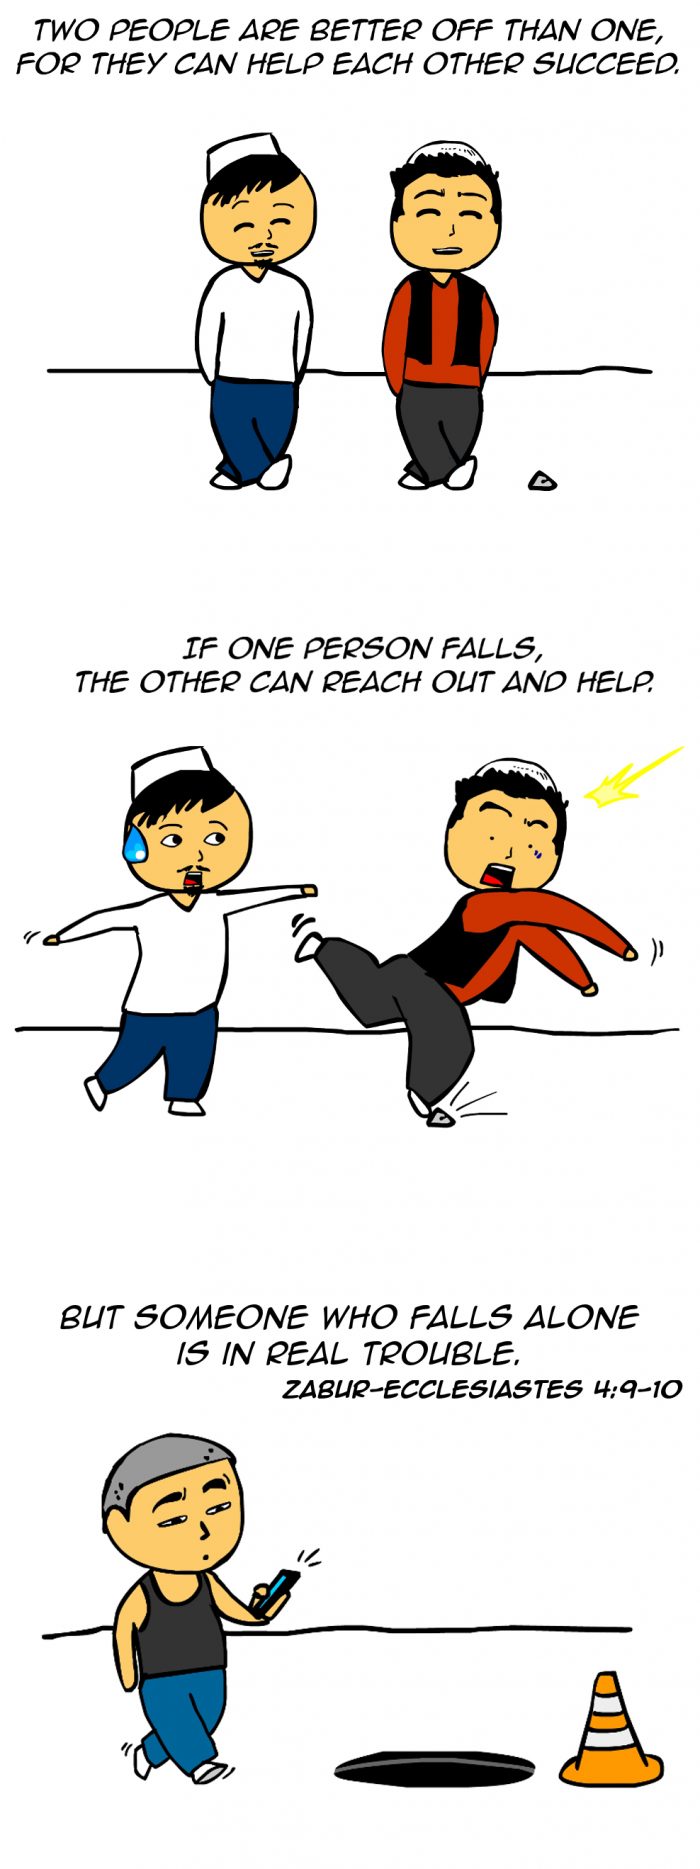 Kitab Comics "Two people are better off than one, for they can help each other succeed. If one person falls, the other can reach out and help. But someone who falls alone is in real trouble." -Zabur-Ecclesiastes 4:9-10